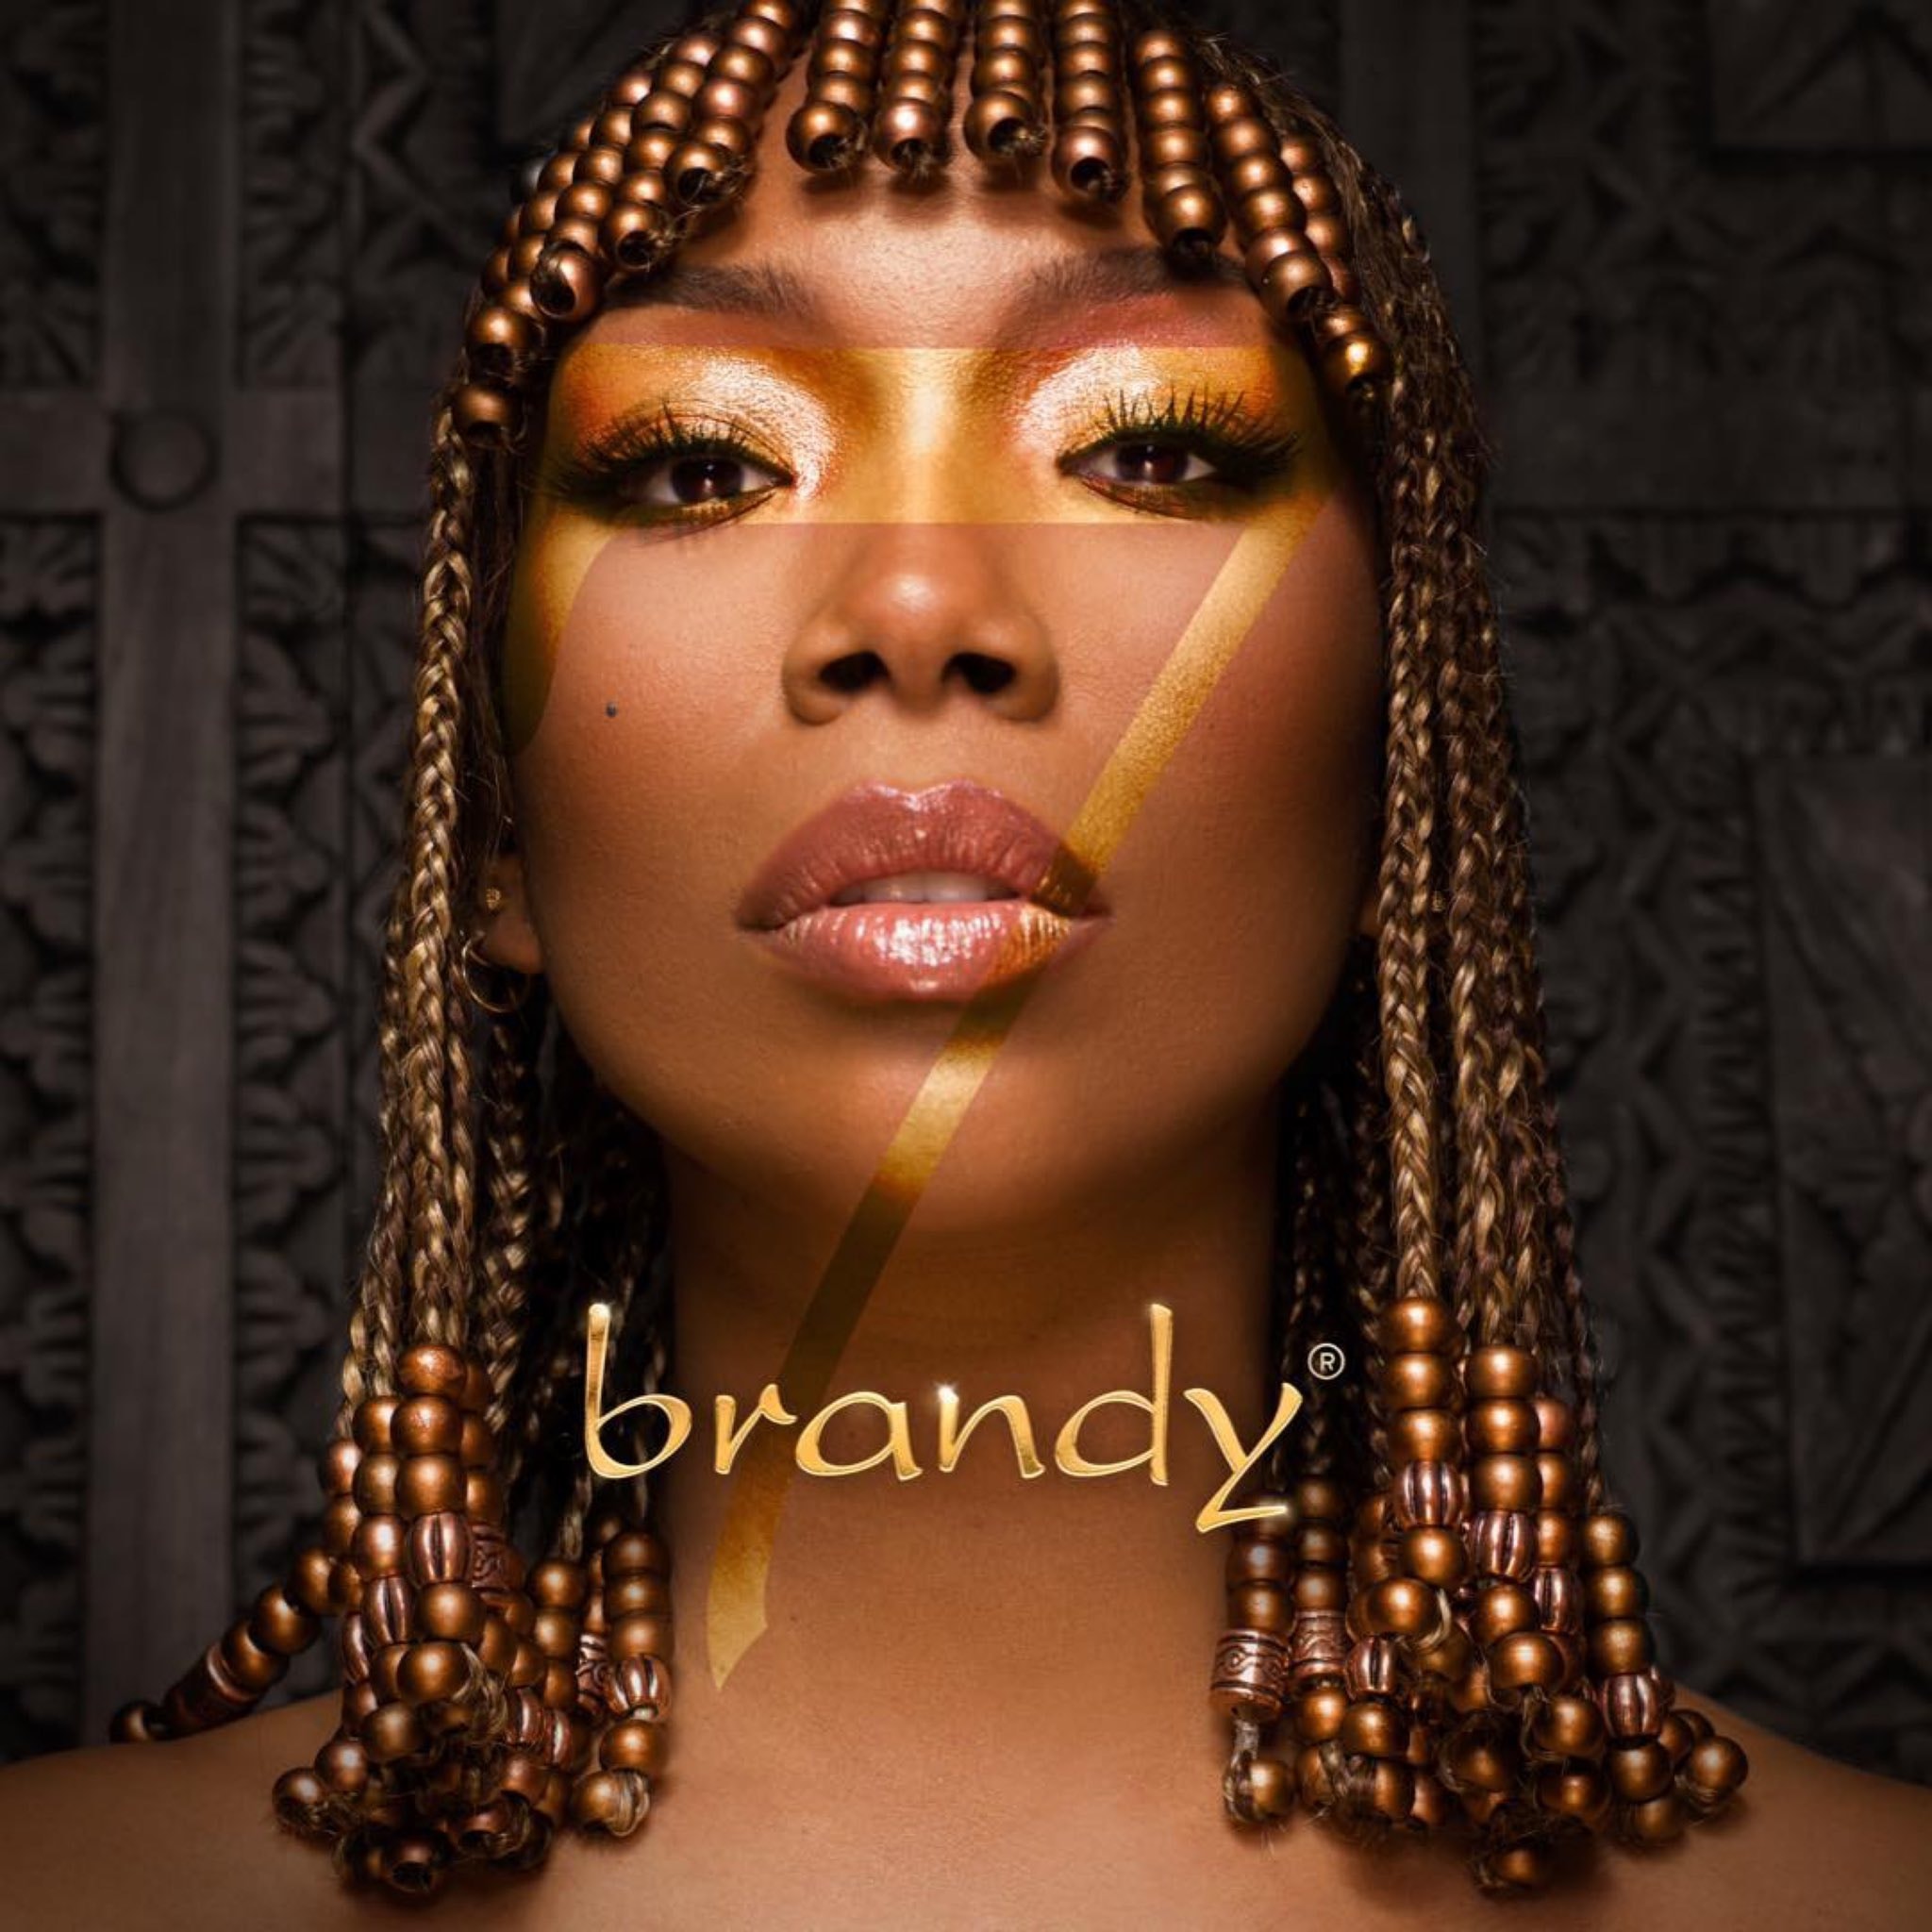 New Music: Brandy – Rather Be (Produced by DJ Camper)